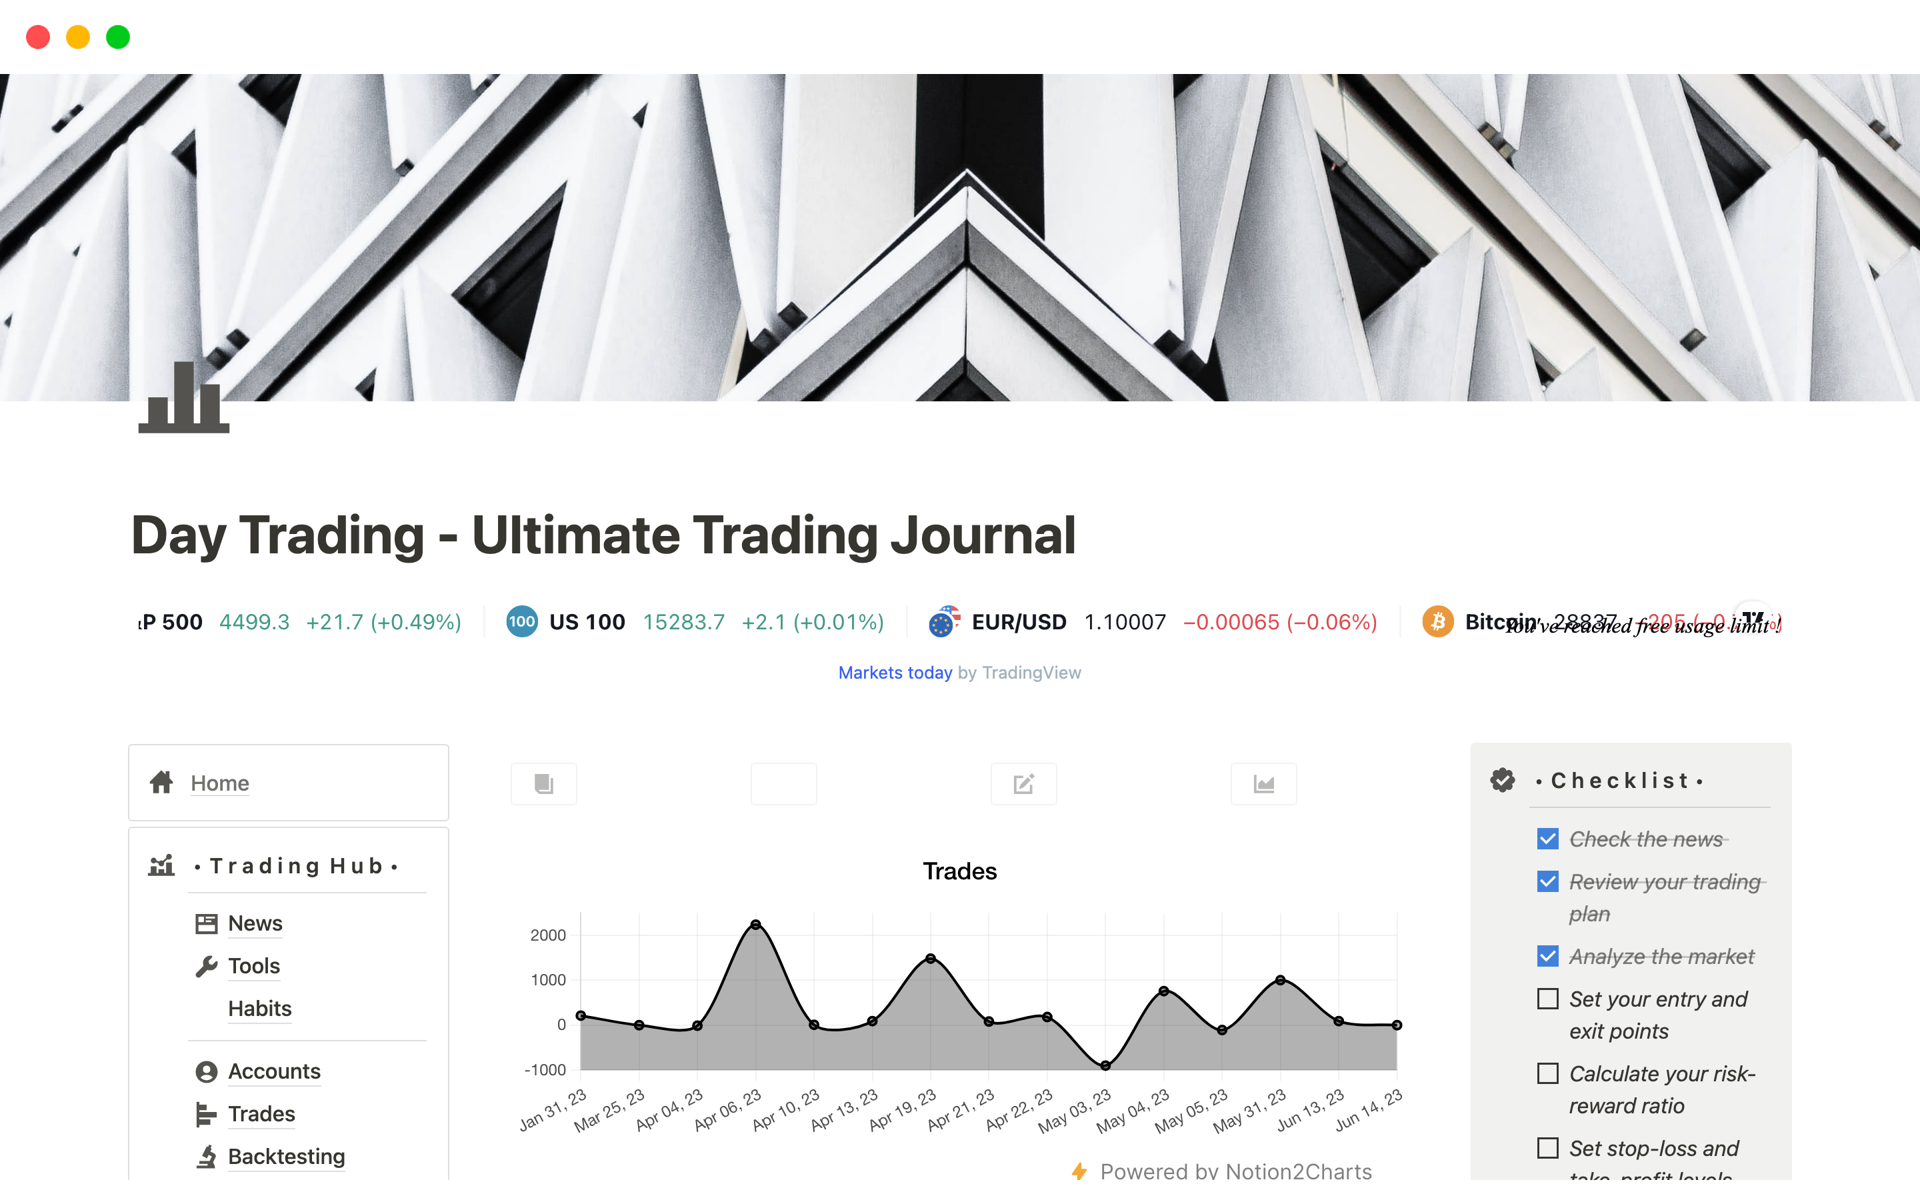 Everything you need to track, tag, and backtest your trades all in one place. Just like the pros.